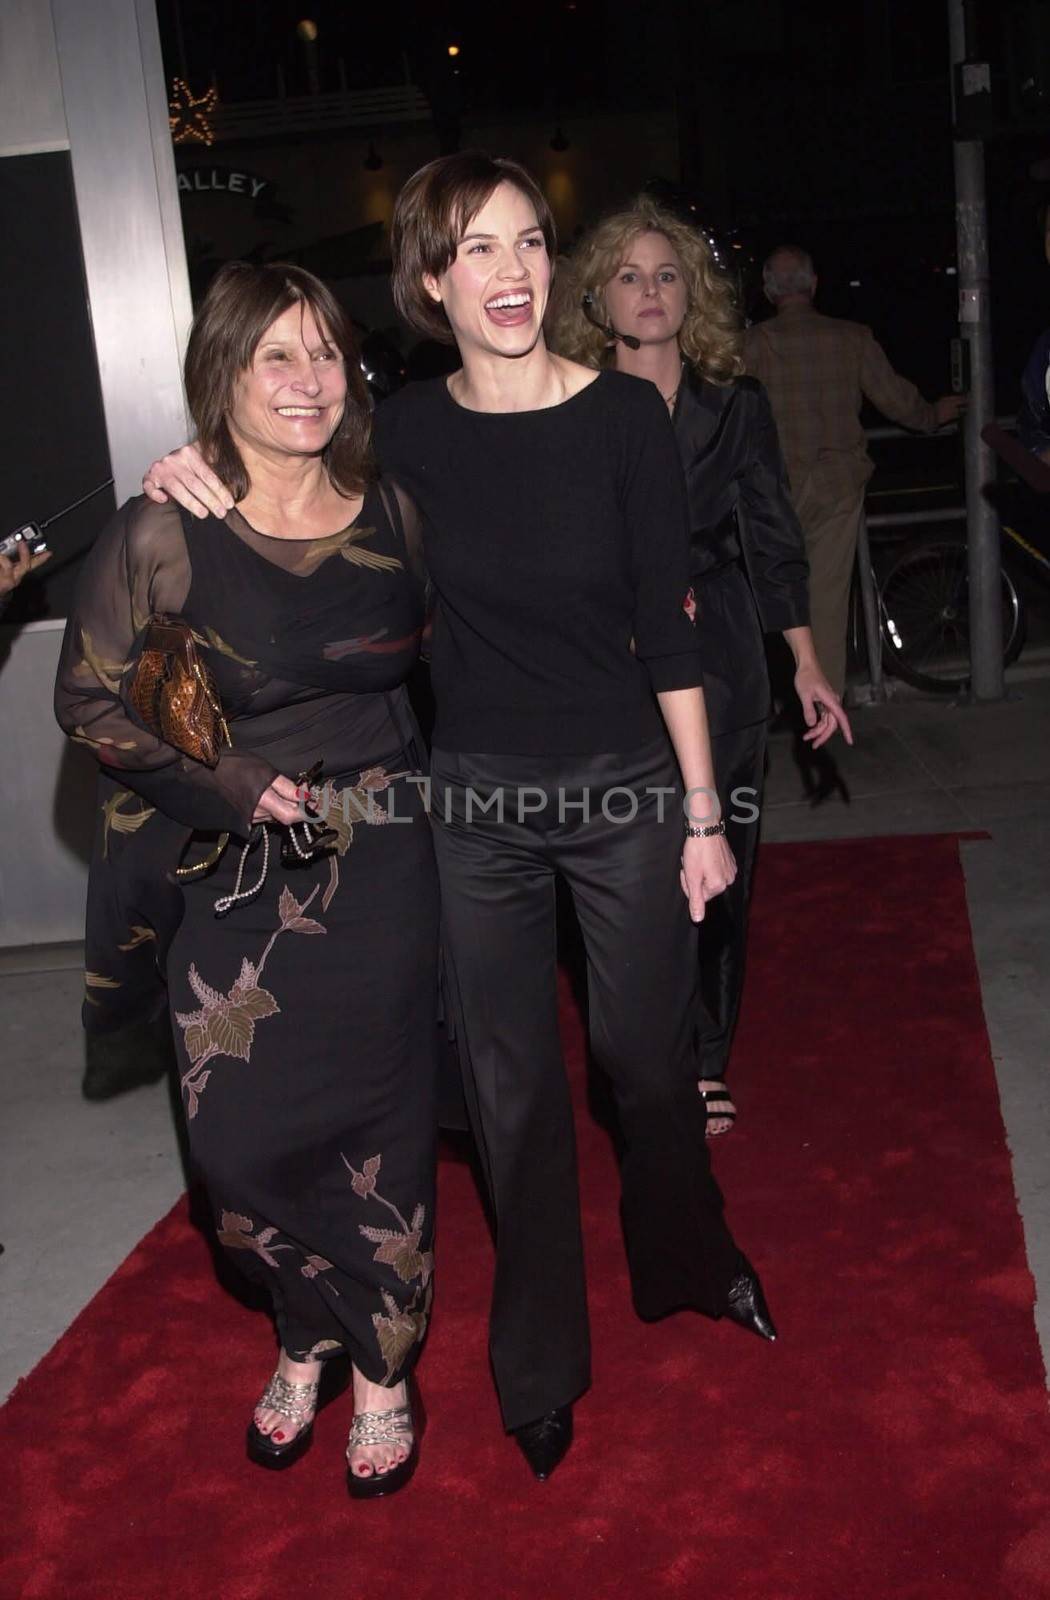 Hilary Swank and friend Holly at the "Starry Starry Night" fundraiser to benefit the Edgemar Center for the Arts. Santa Monica, 04-15-00